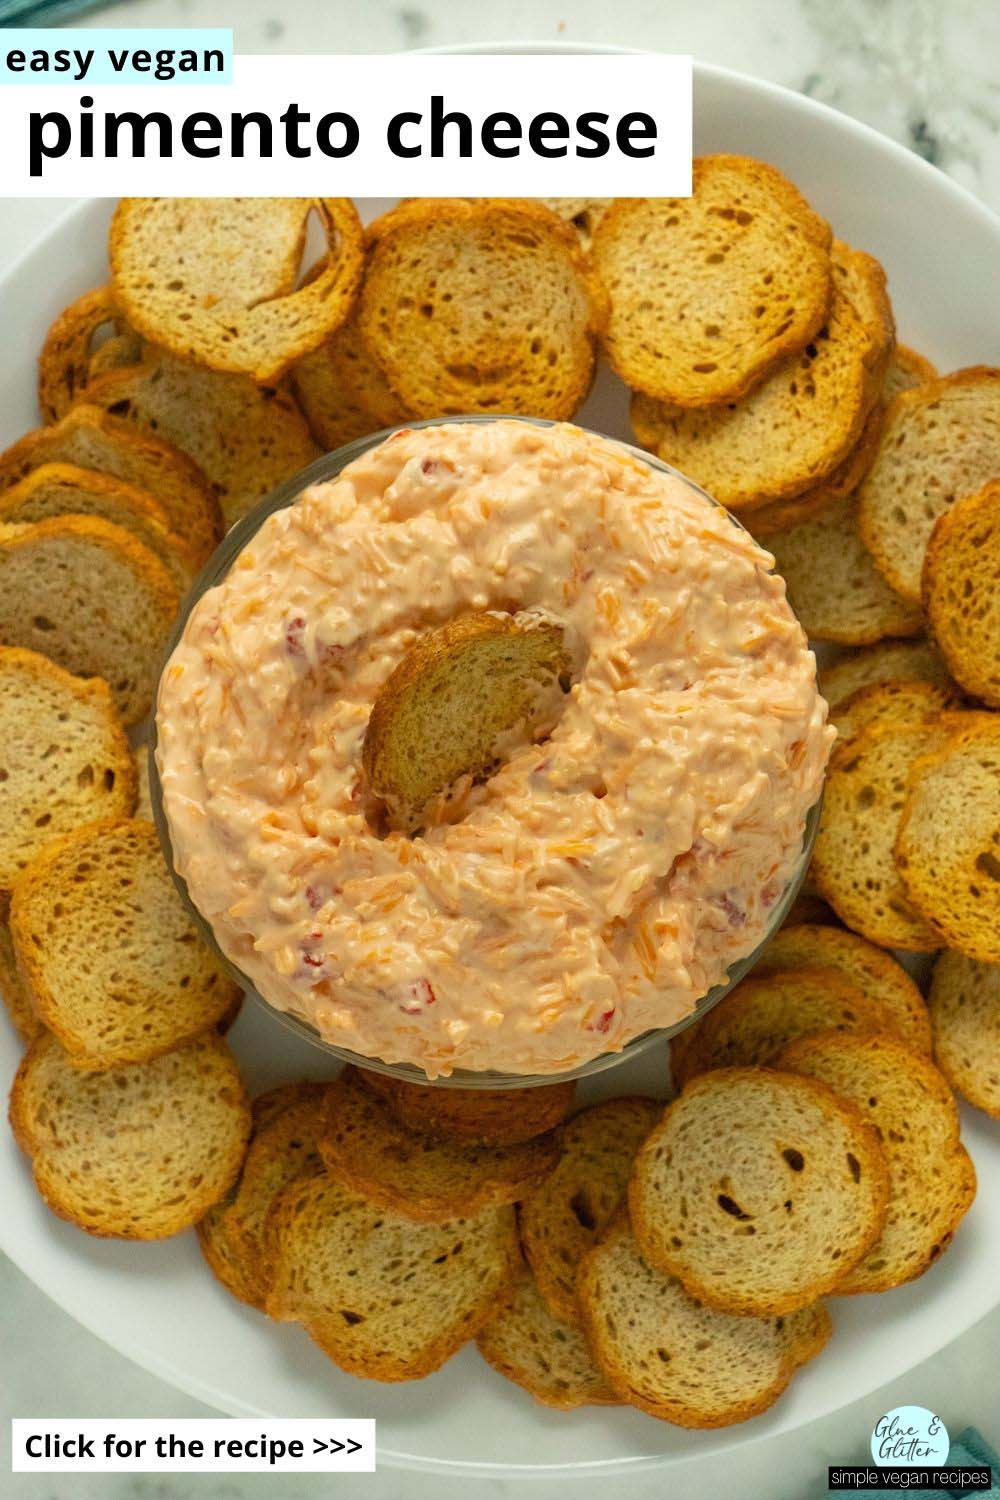 serving platted with vegan pimento cheese and bagel chips, text overlay